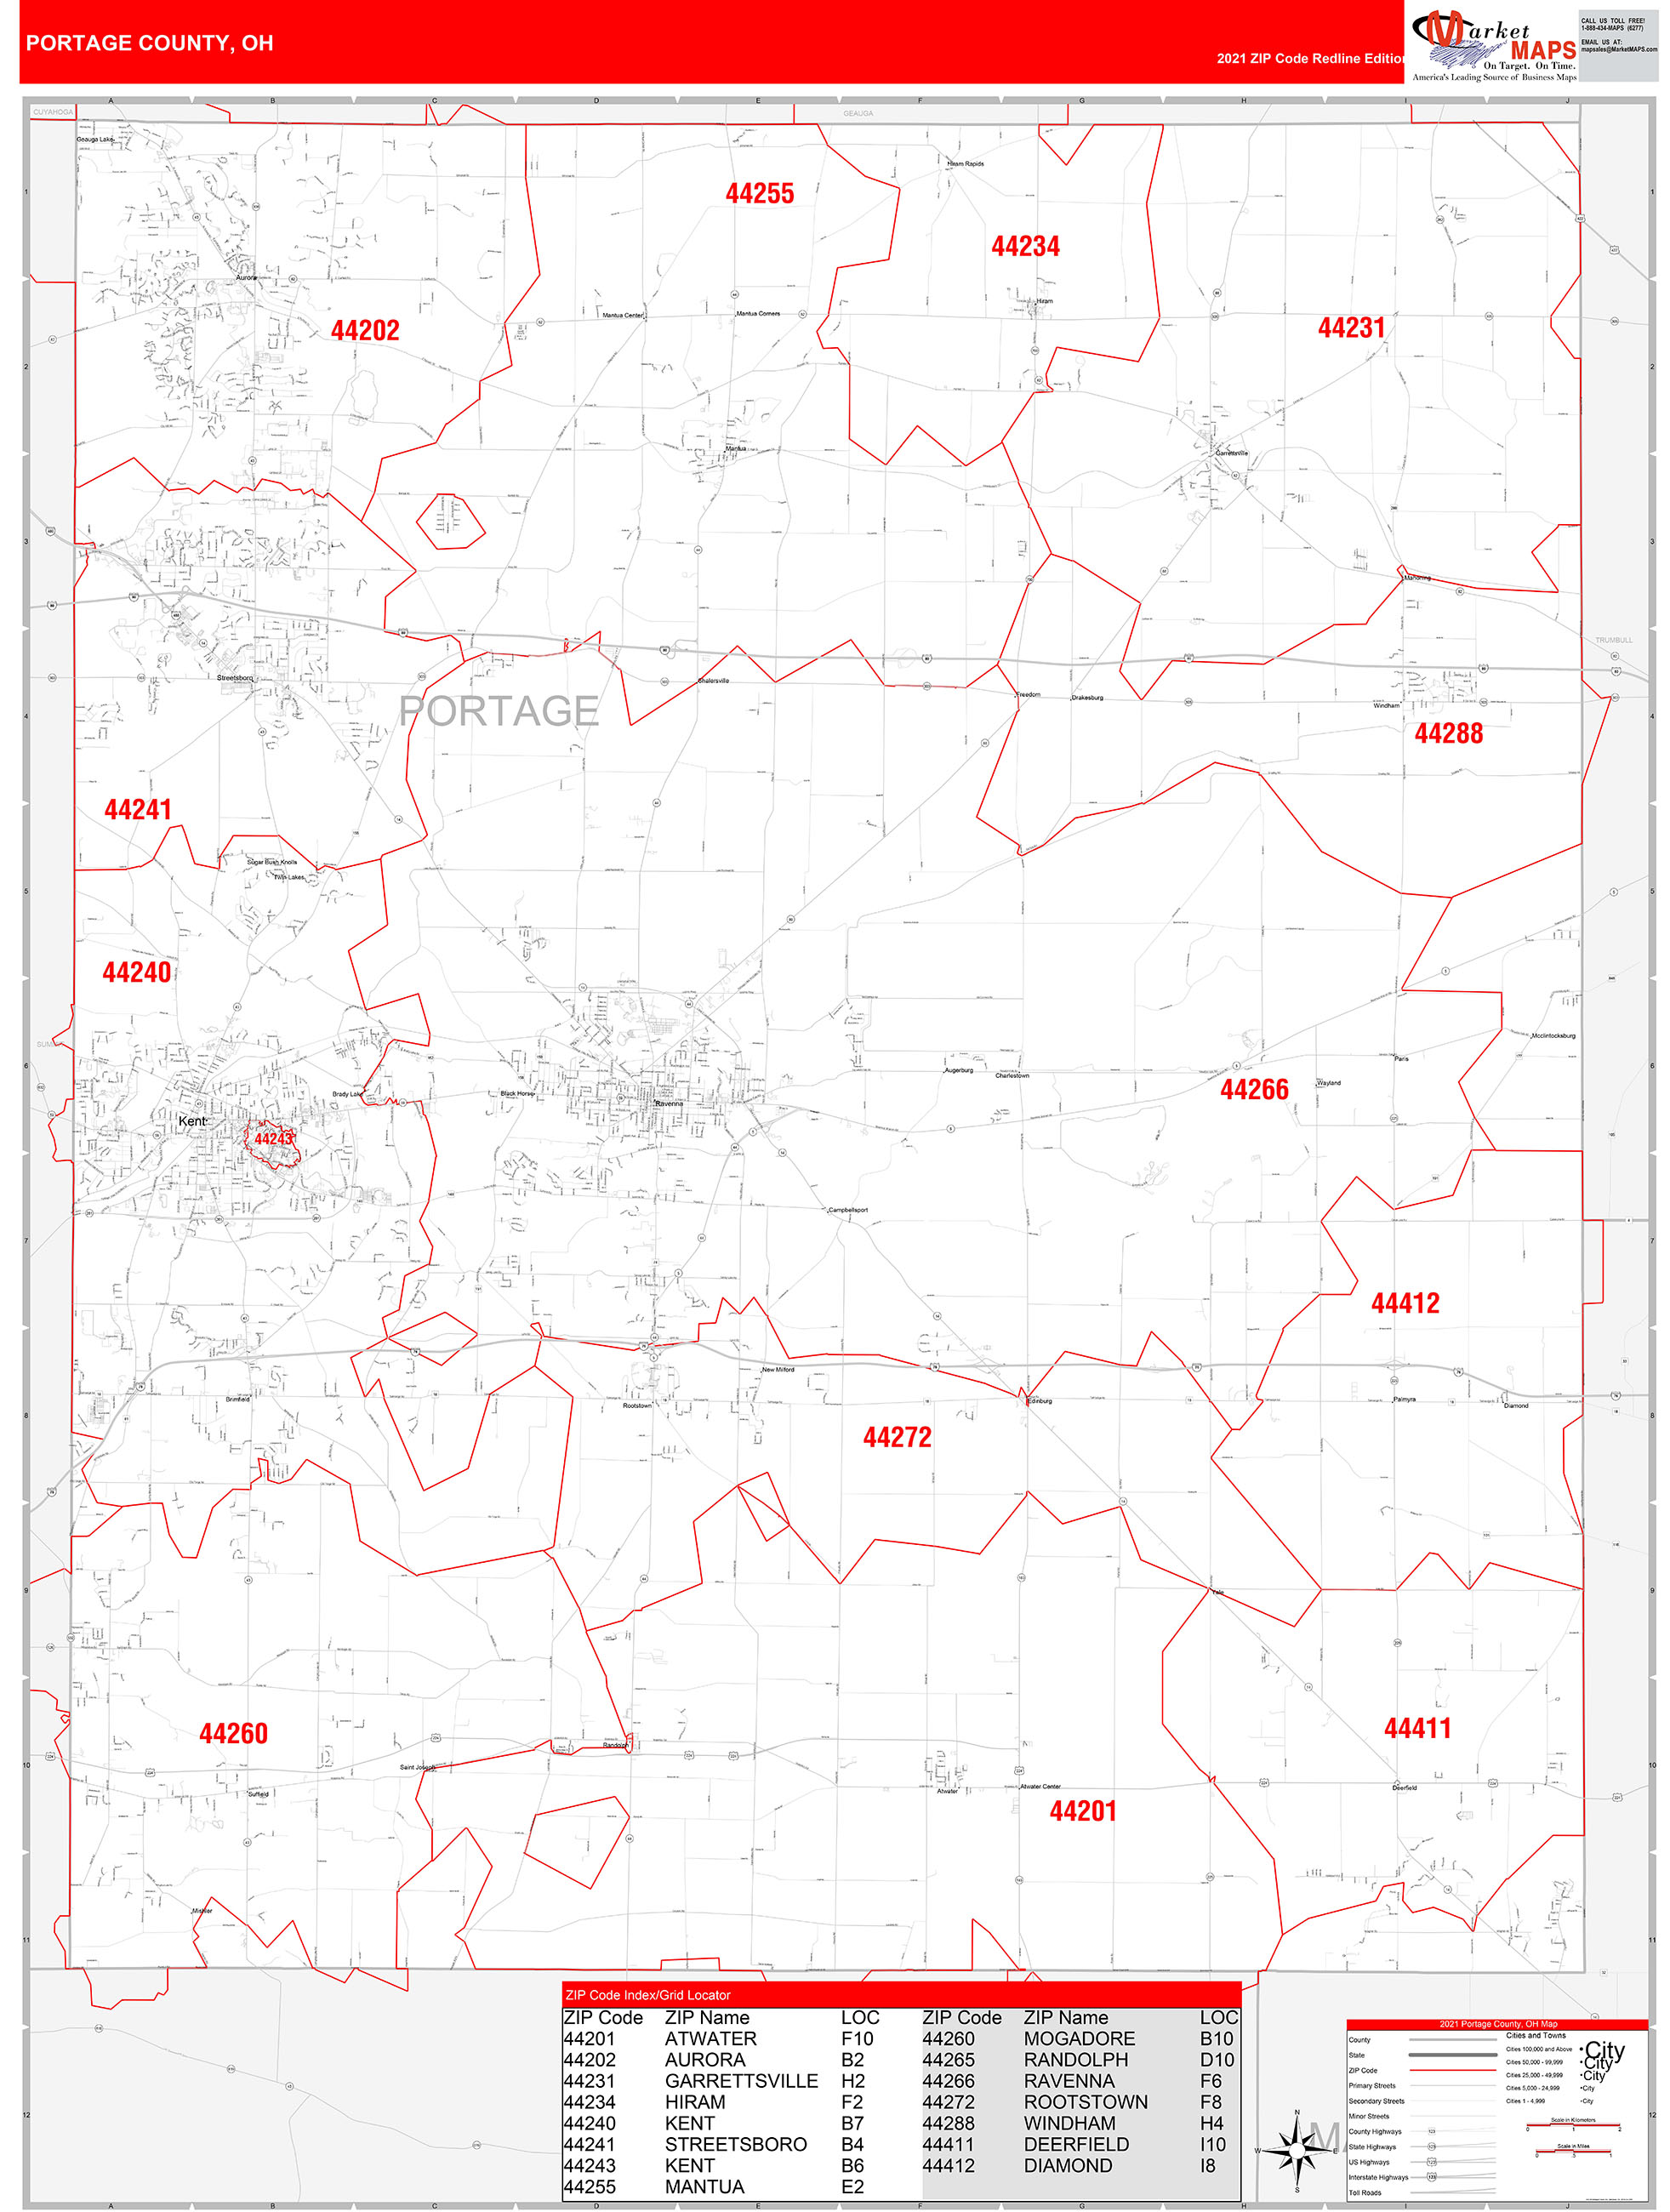 Portage County Oh Zip Code Wall Map Red Line Style By Marketmaps Mapsales 8767